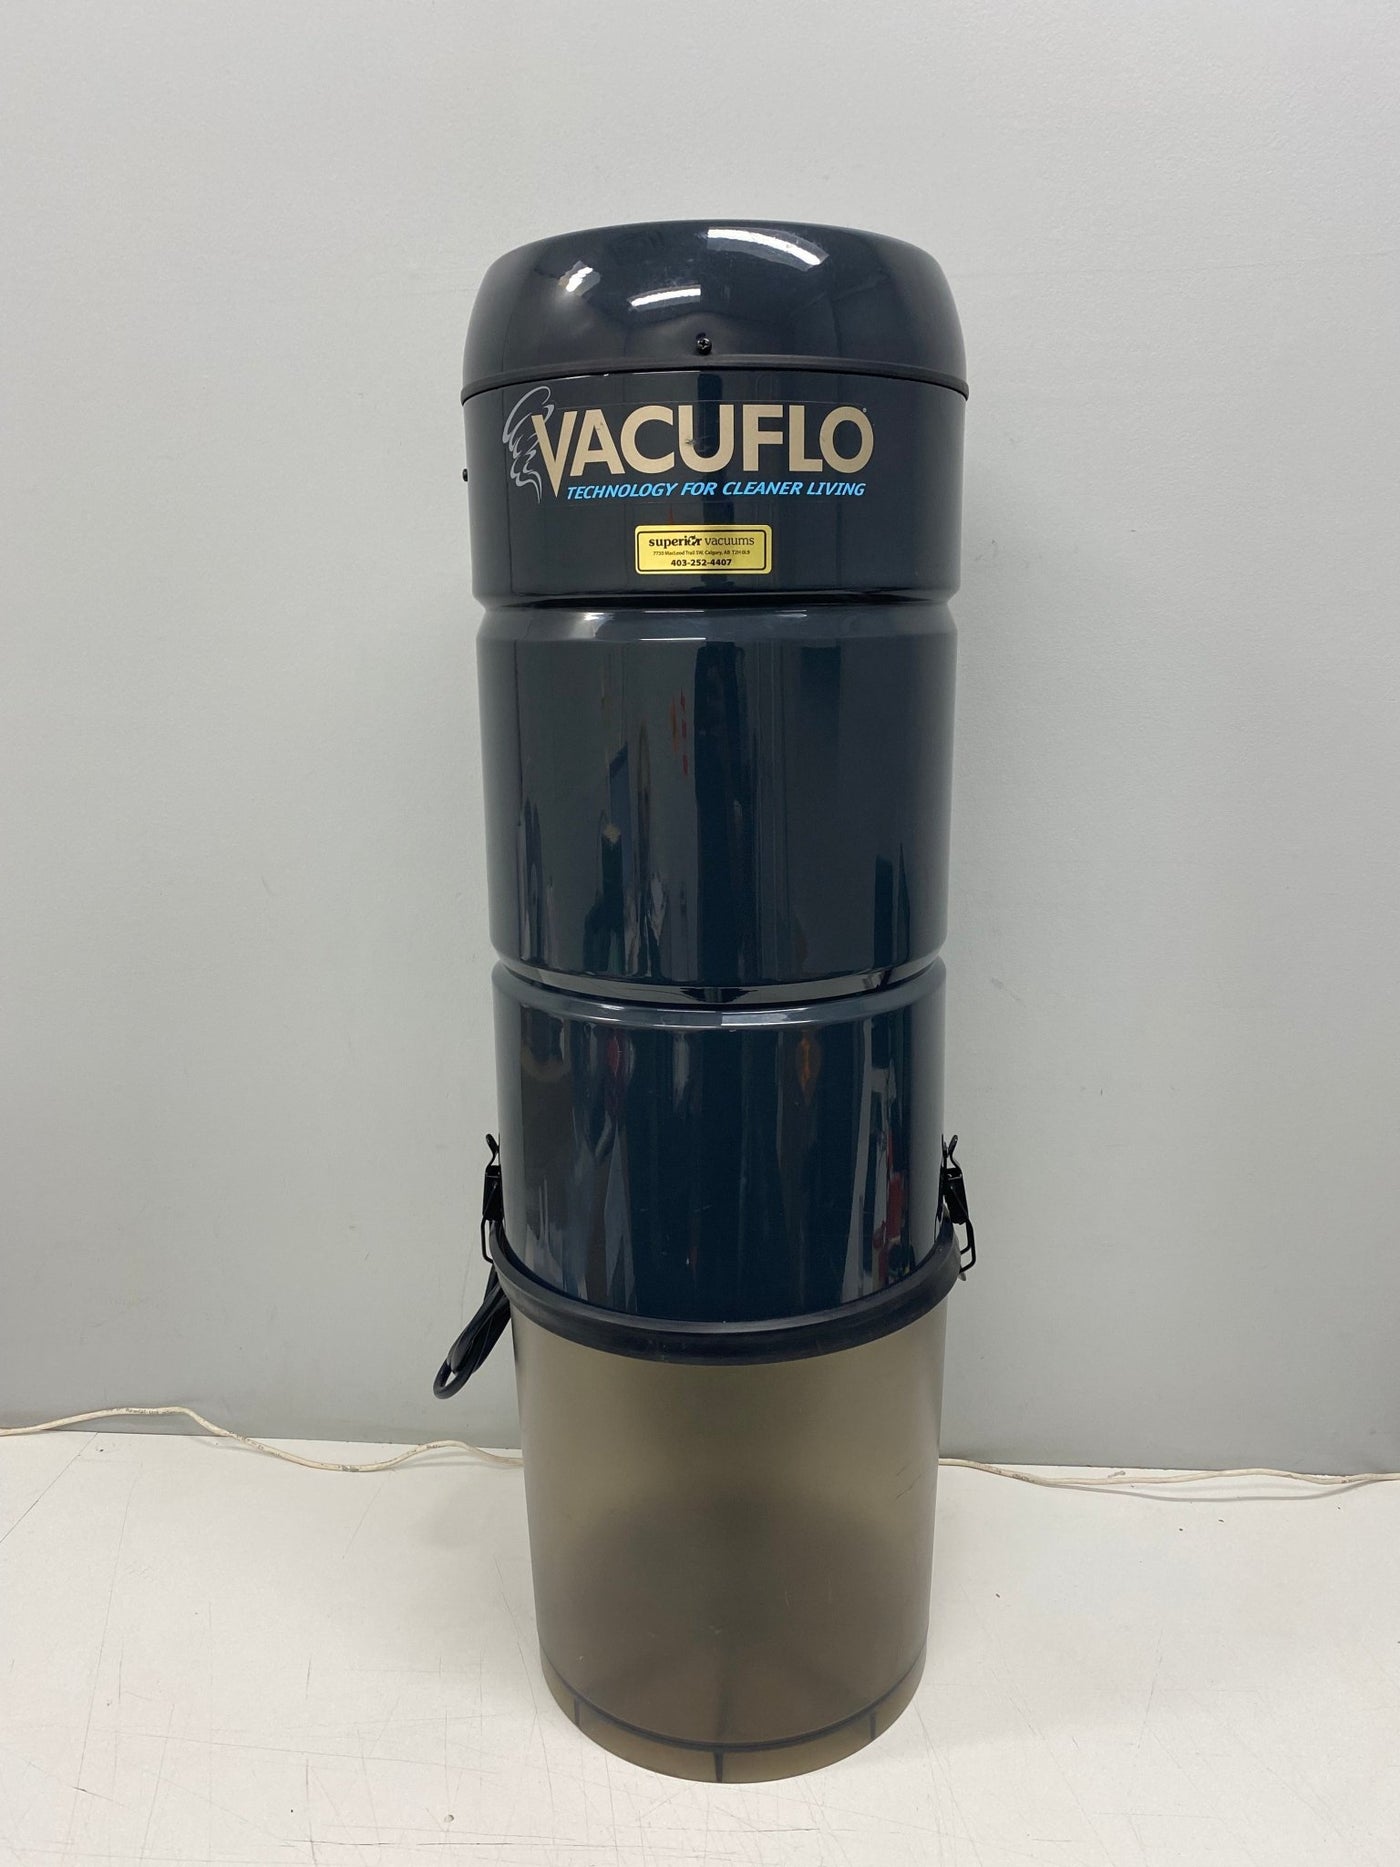 Vacuflo 466Q True Cyclonic Central Vacuum Cleaner with 6-Month Warranty